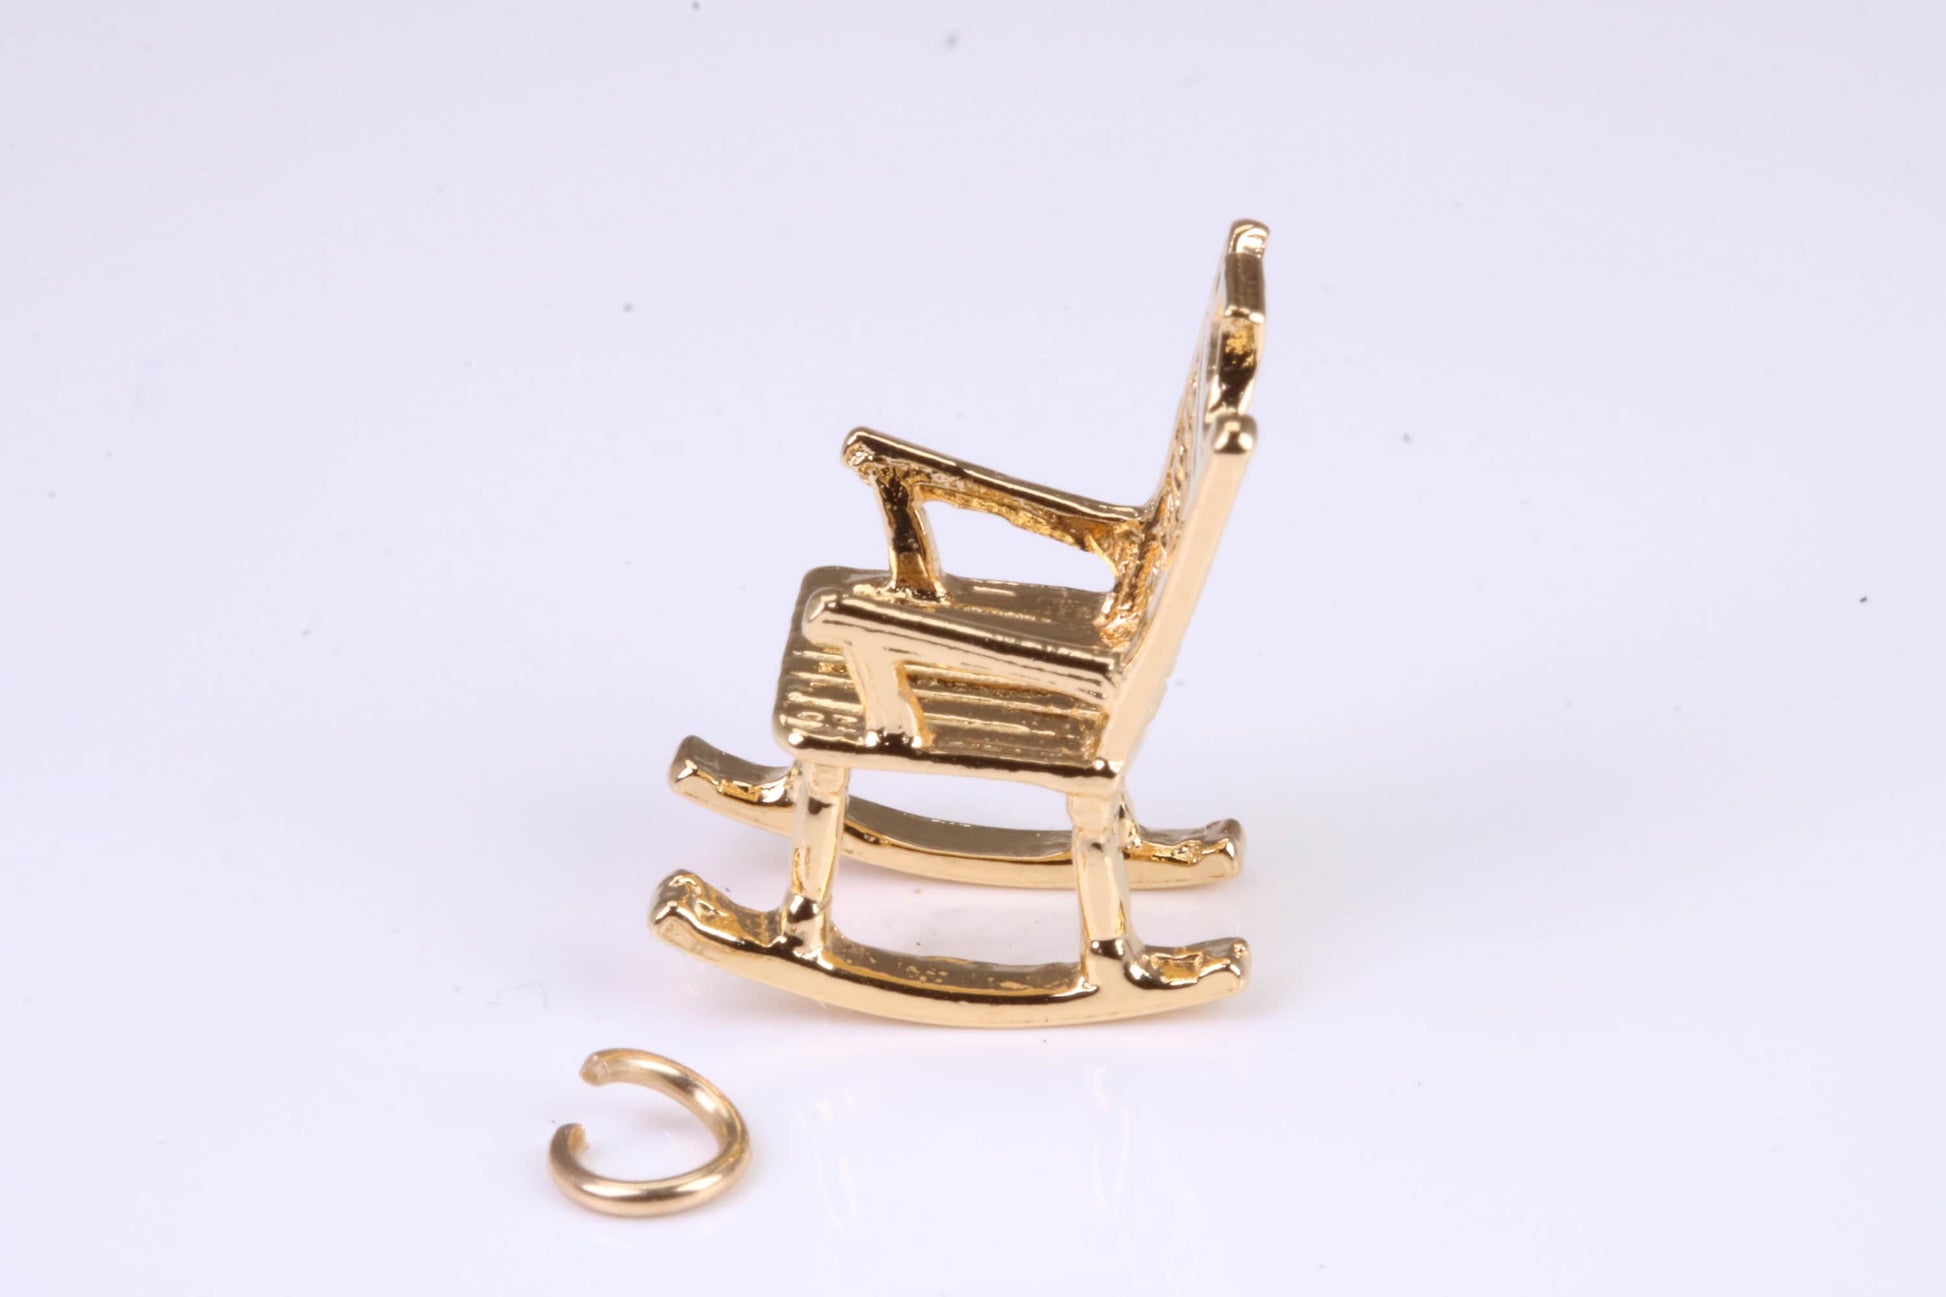 Rocking Chair Charm, Traditional Charm, Made from Solid Yellow Gold, British Hallmarked, Complete with Attachment Link